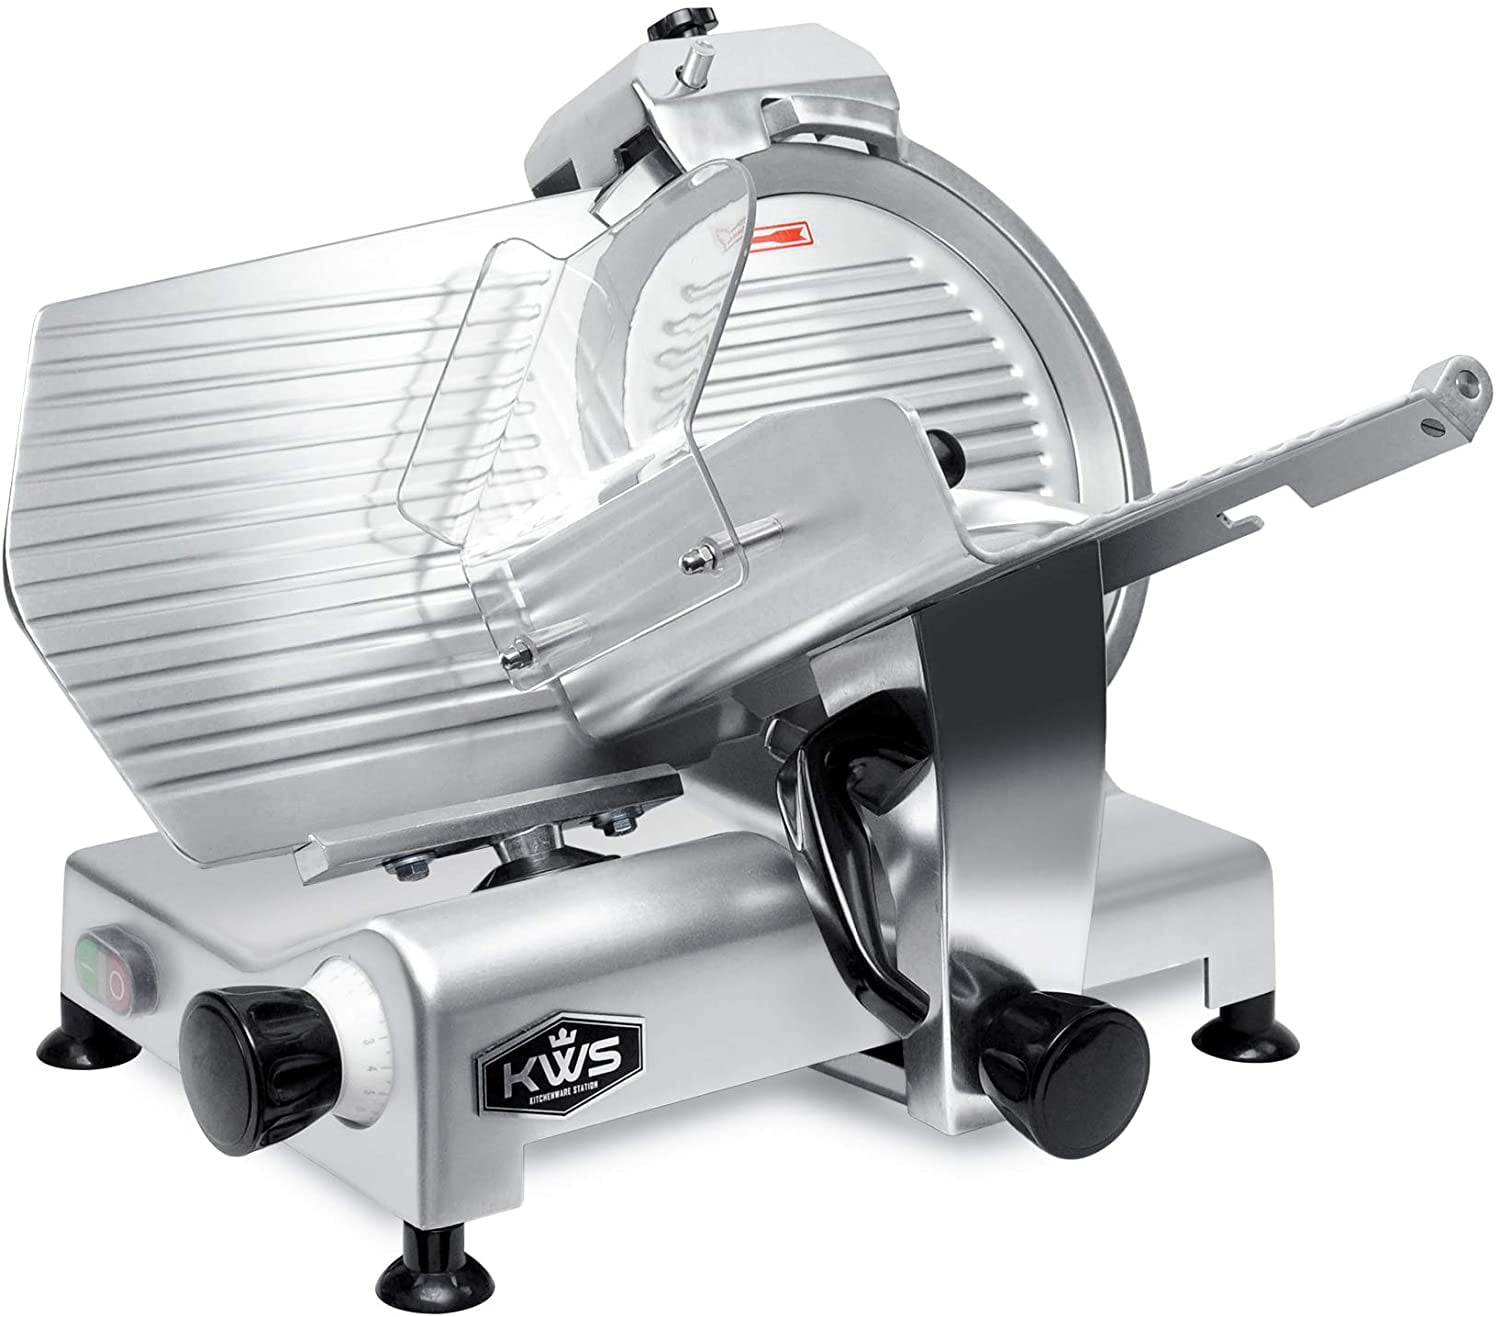 Stainless Steel Blade-Silver KWS Commercial 320w Electric Meat Slicer 10 Frozen Meat Deli Slicer Coffee Shop/restaurant and Home Use Low Noises 